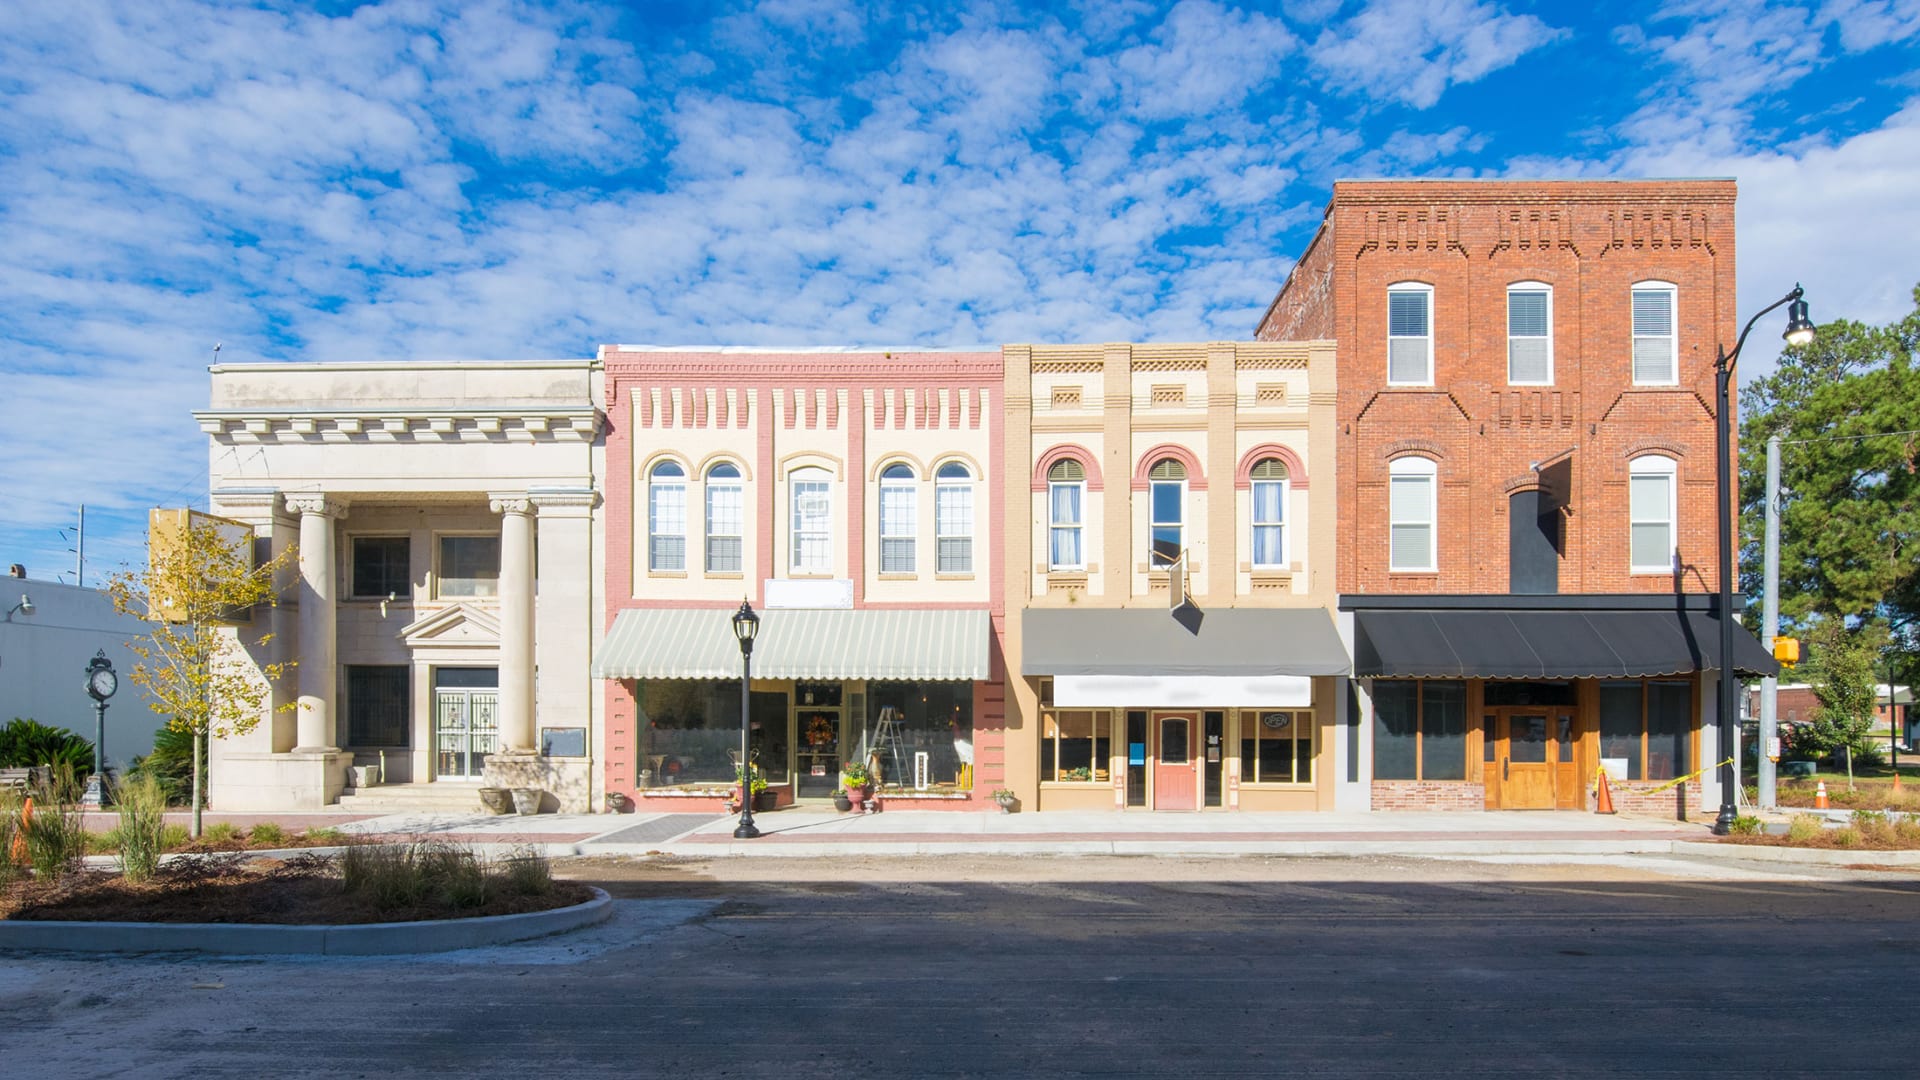 New Report: 2022 Is Set to Be a Banner Year for America's Small Towns (and Their Small Businesses)